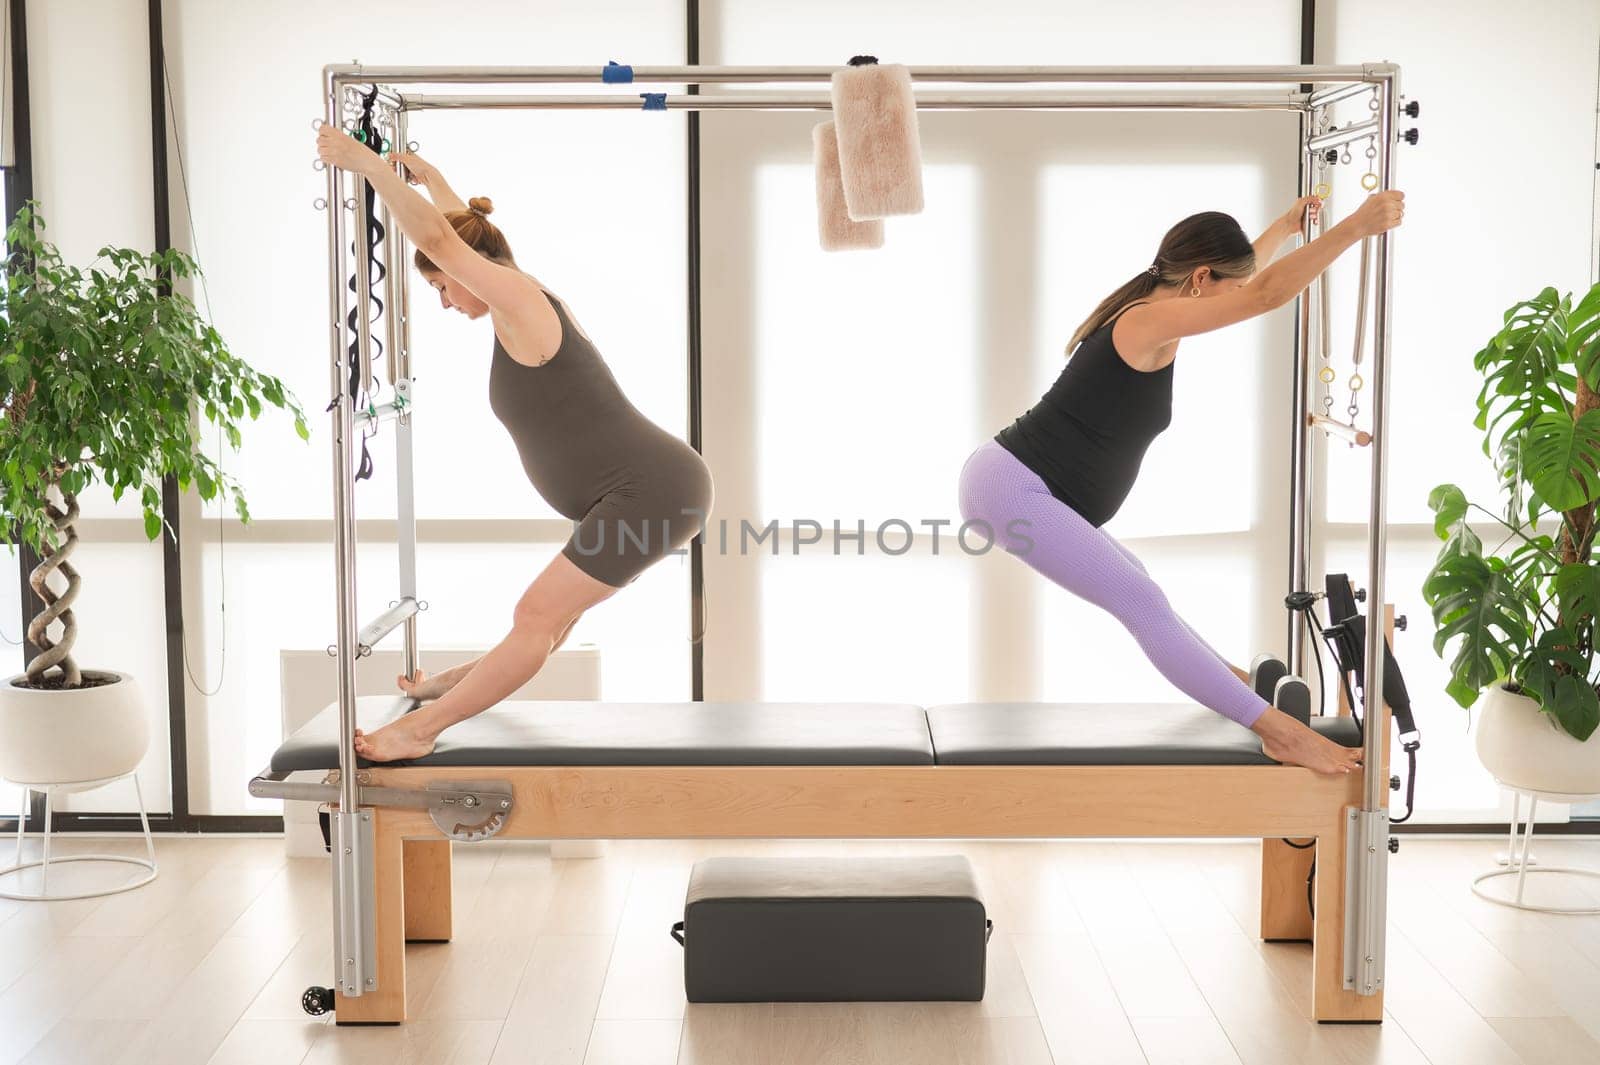 Two pregnant women are doing Pilates on a Cadillac reformer